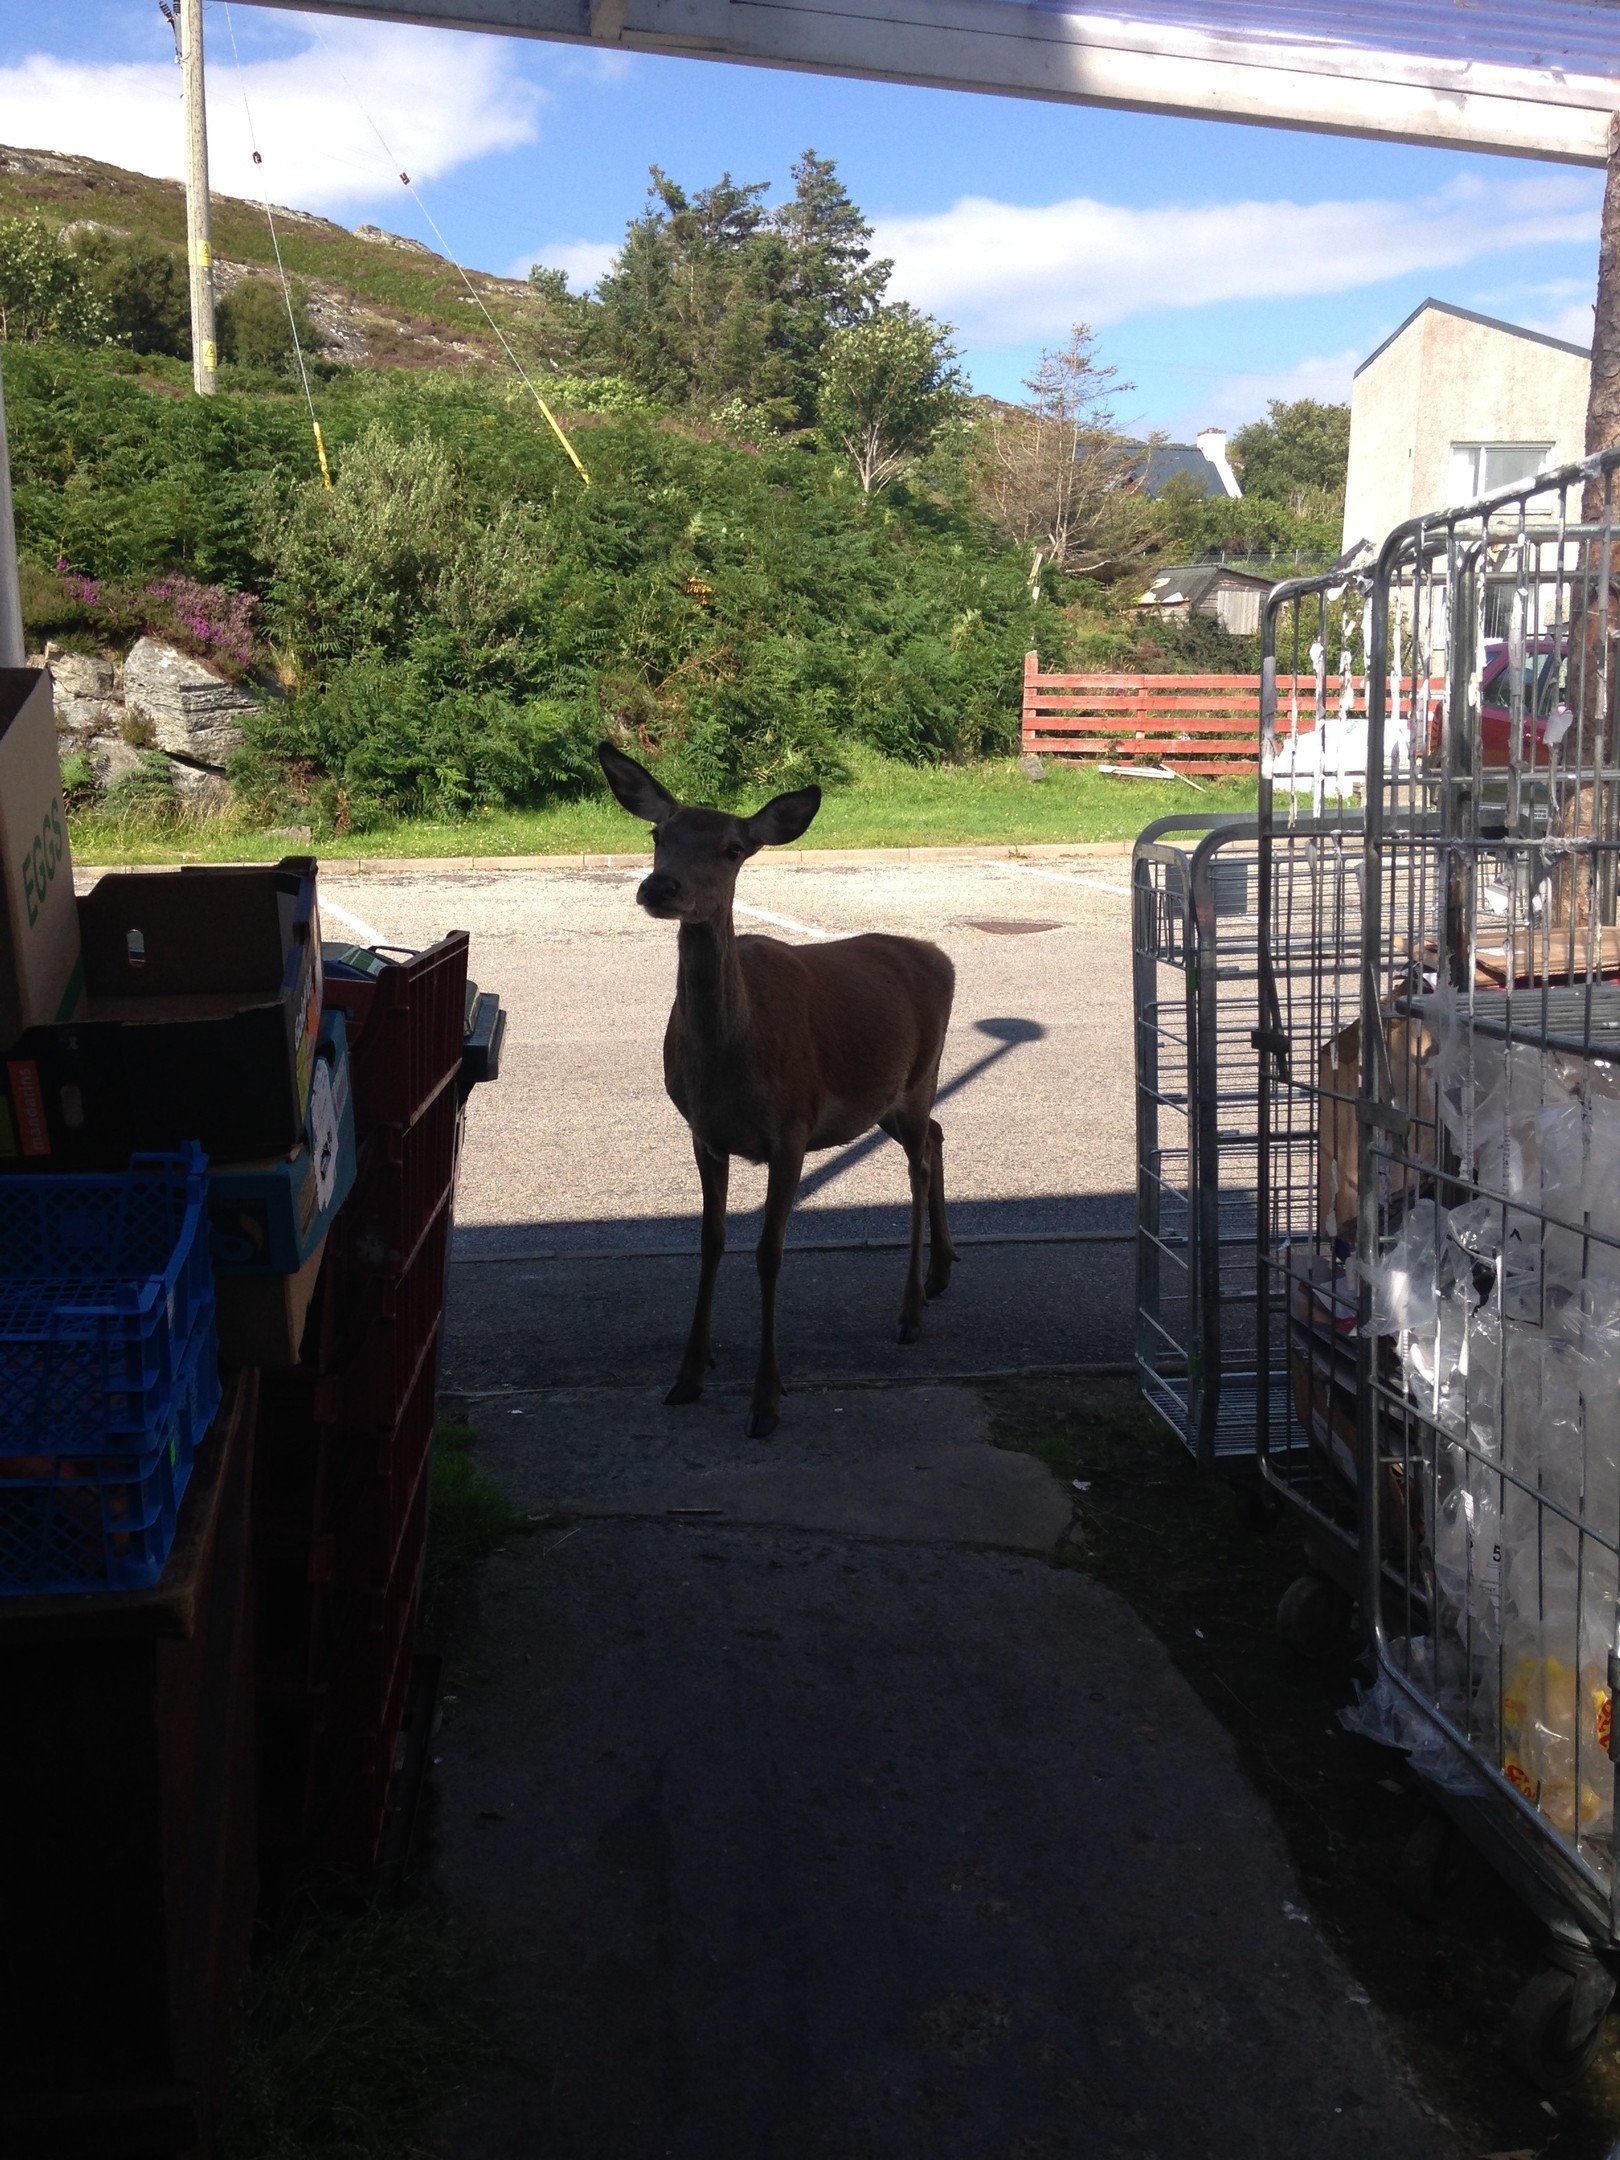 A deer makes a daring raid in the store area of a Highland shop